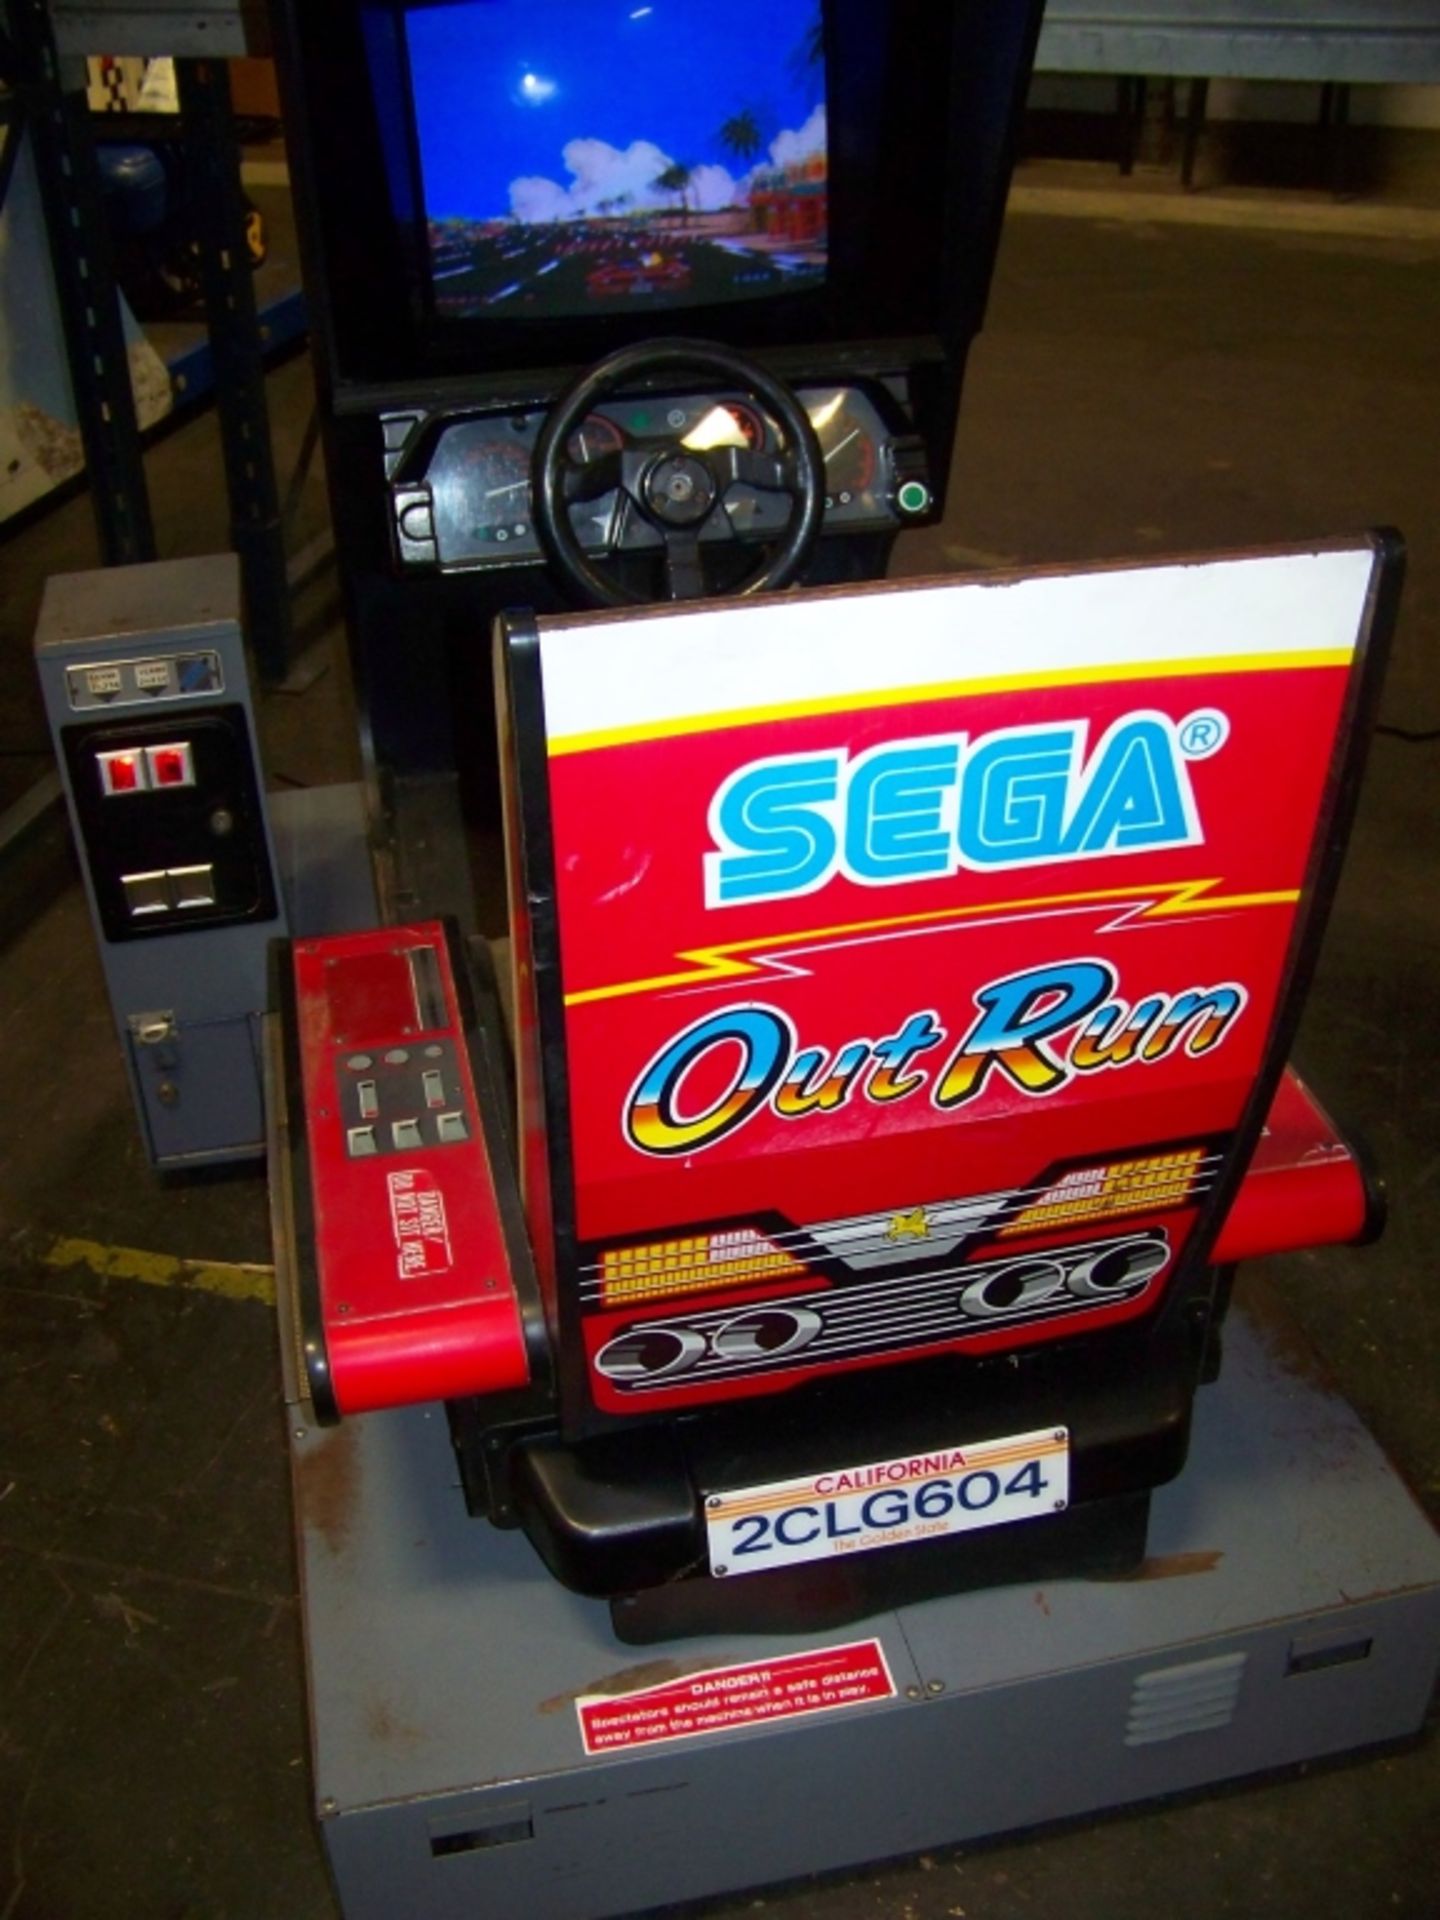 SEGA OUTRUN CLASSIC DELUXE ARCADE GAME MOTION - Image 3 of 4